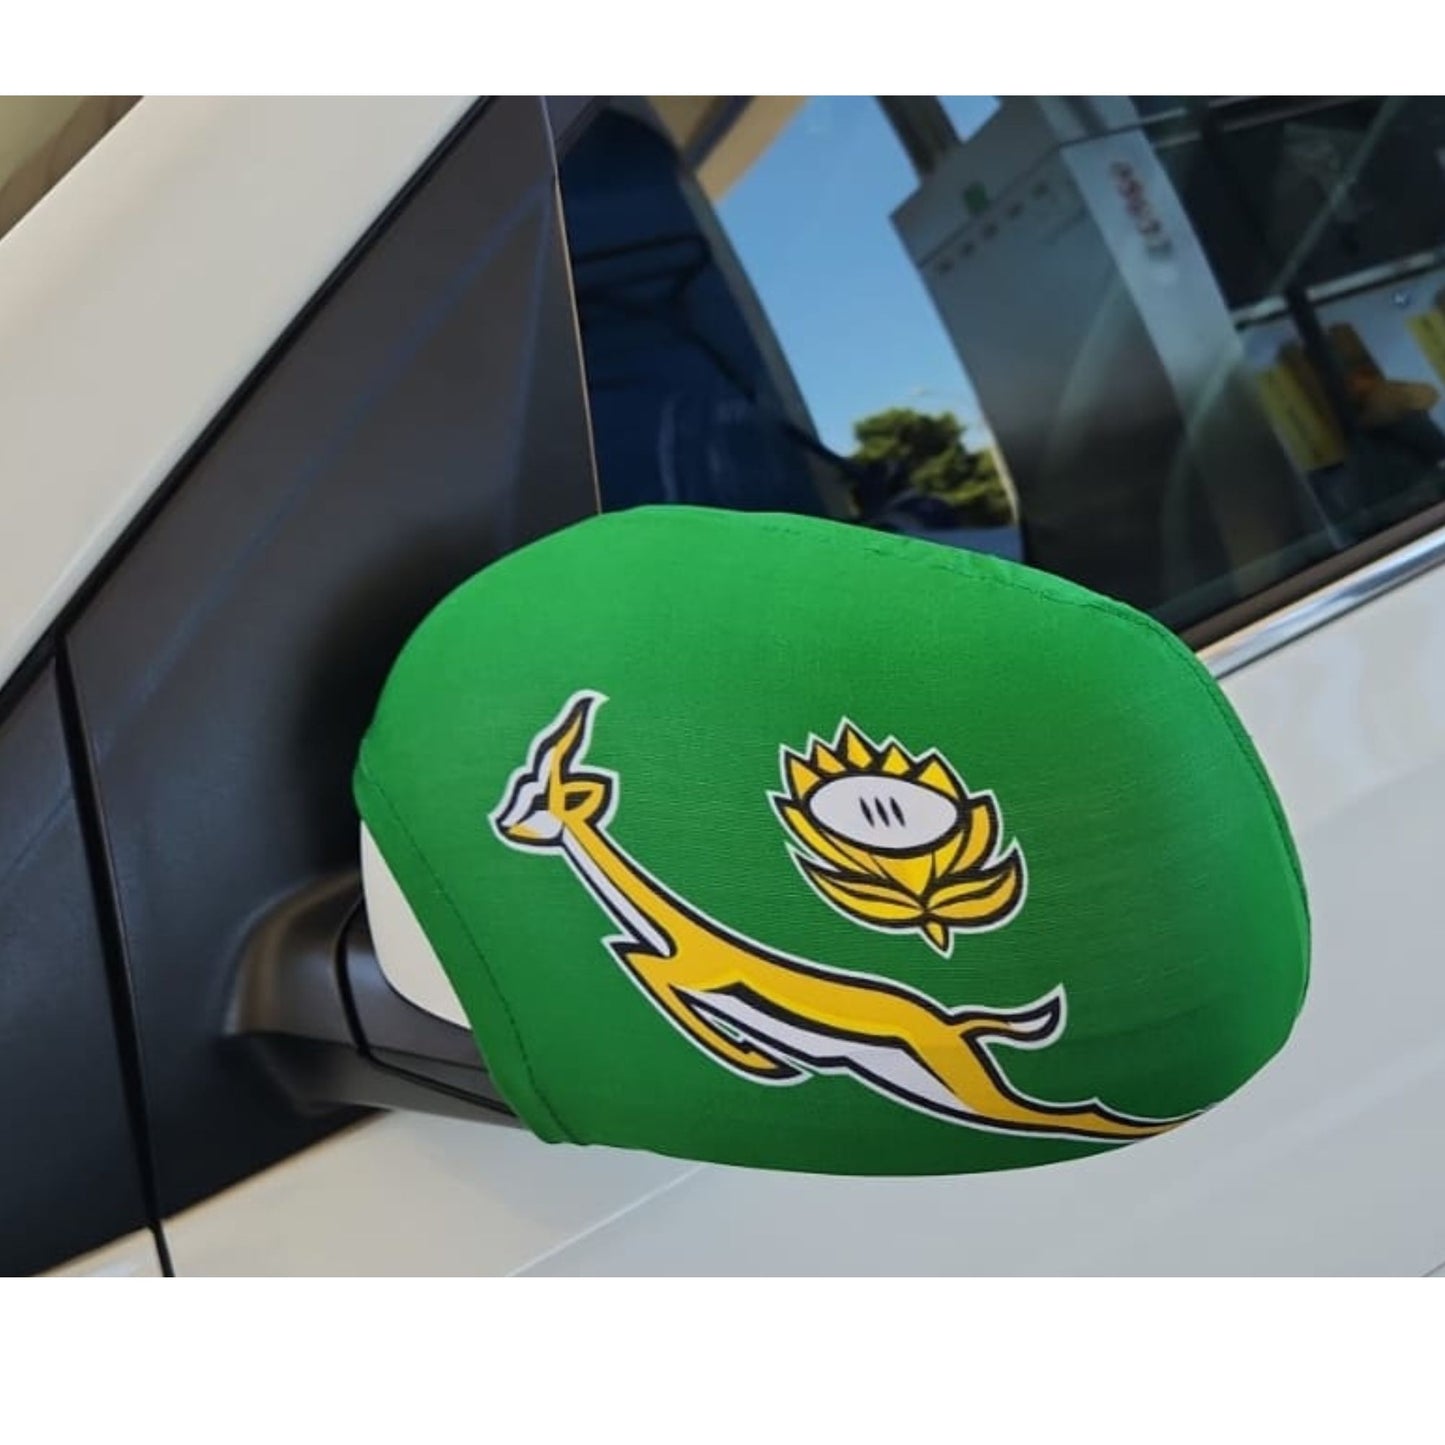 Car Mirror Covers - A mark of Springbok Rugby Supporters